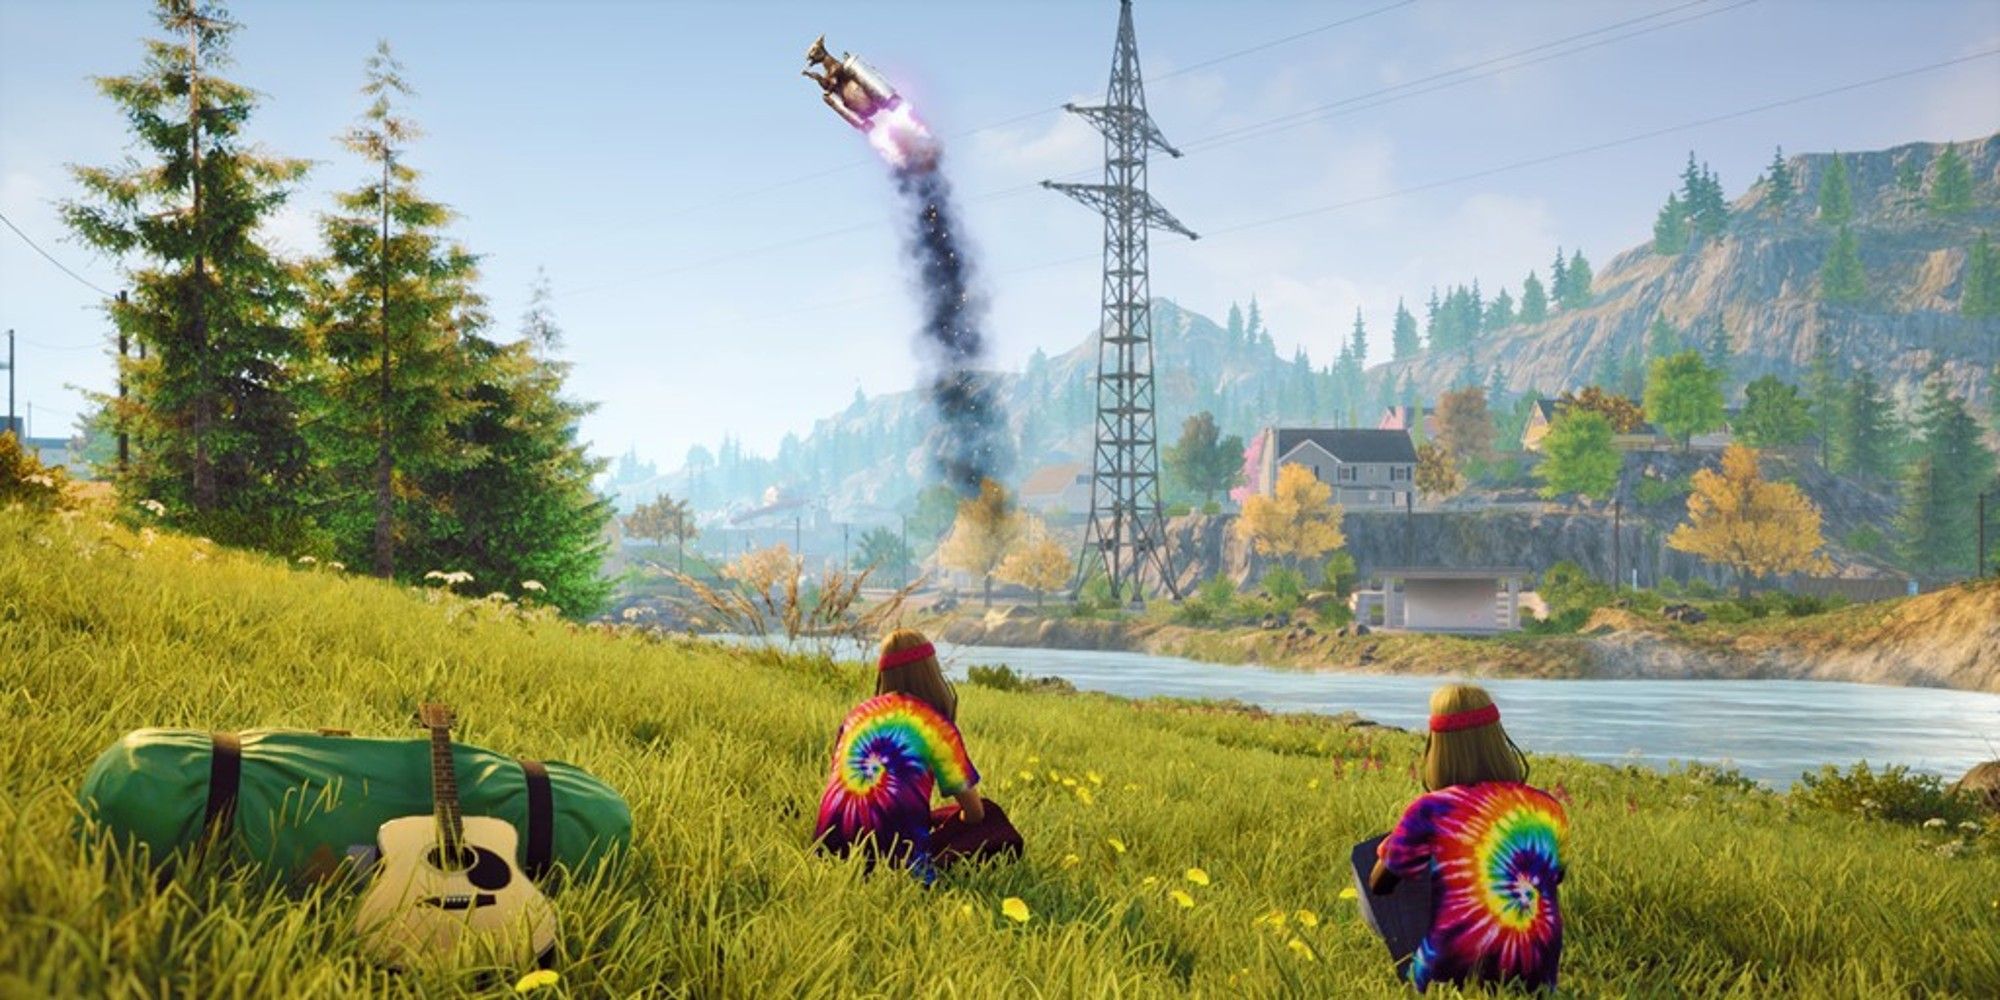 Goat Simulator 3 - Goat flying in the air using rocket.